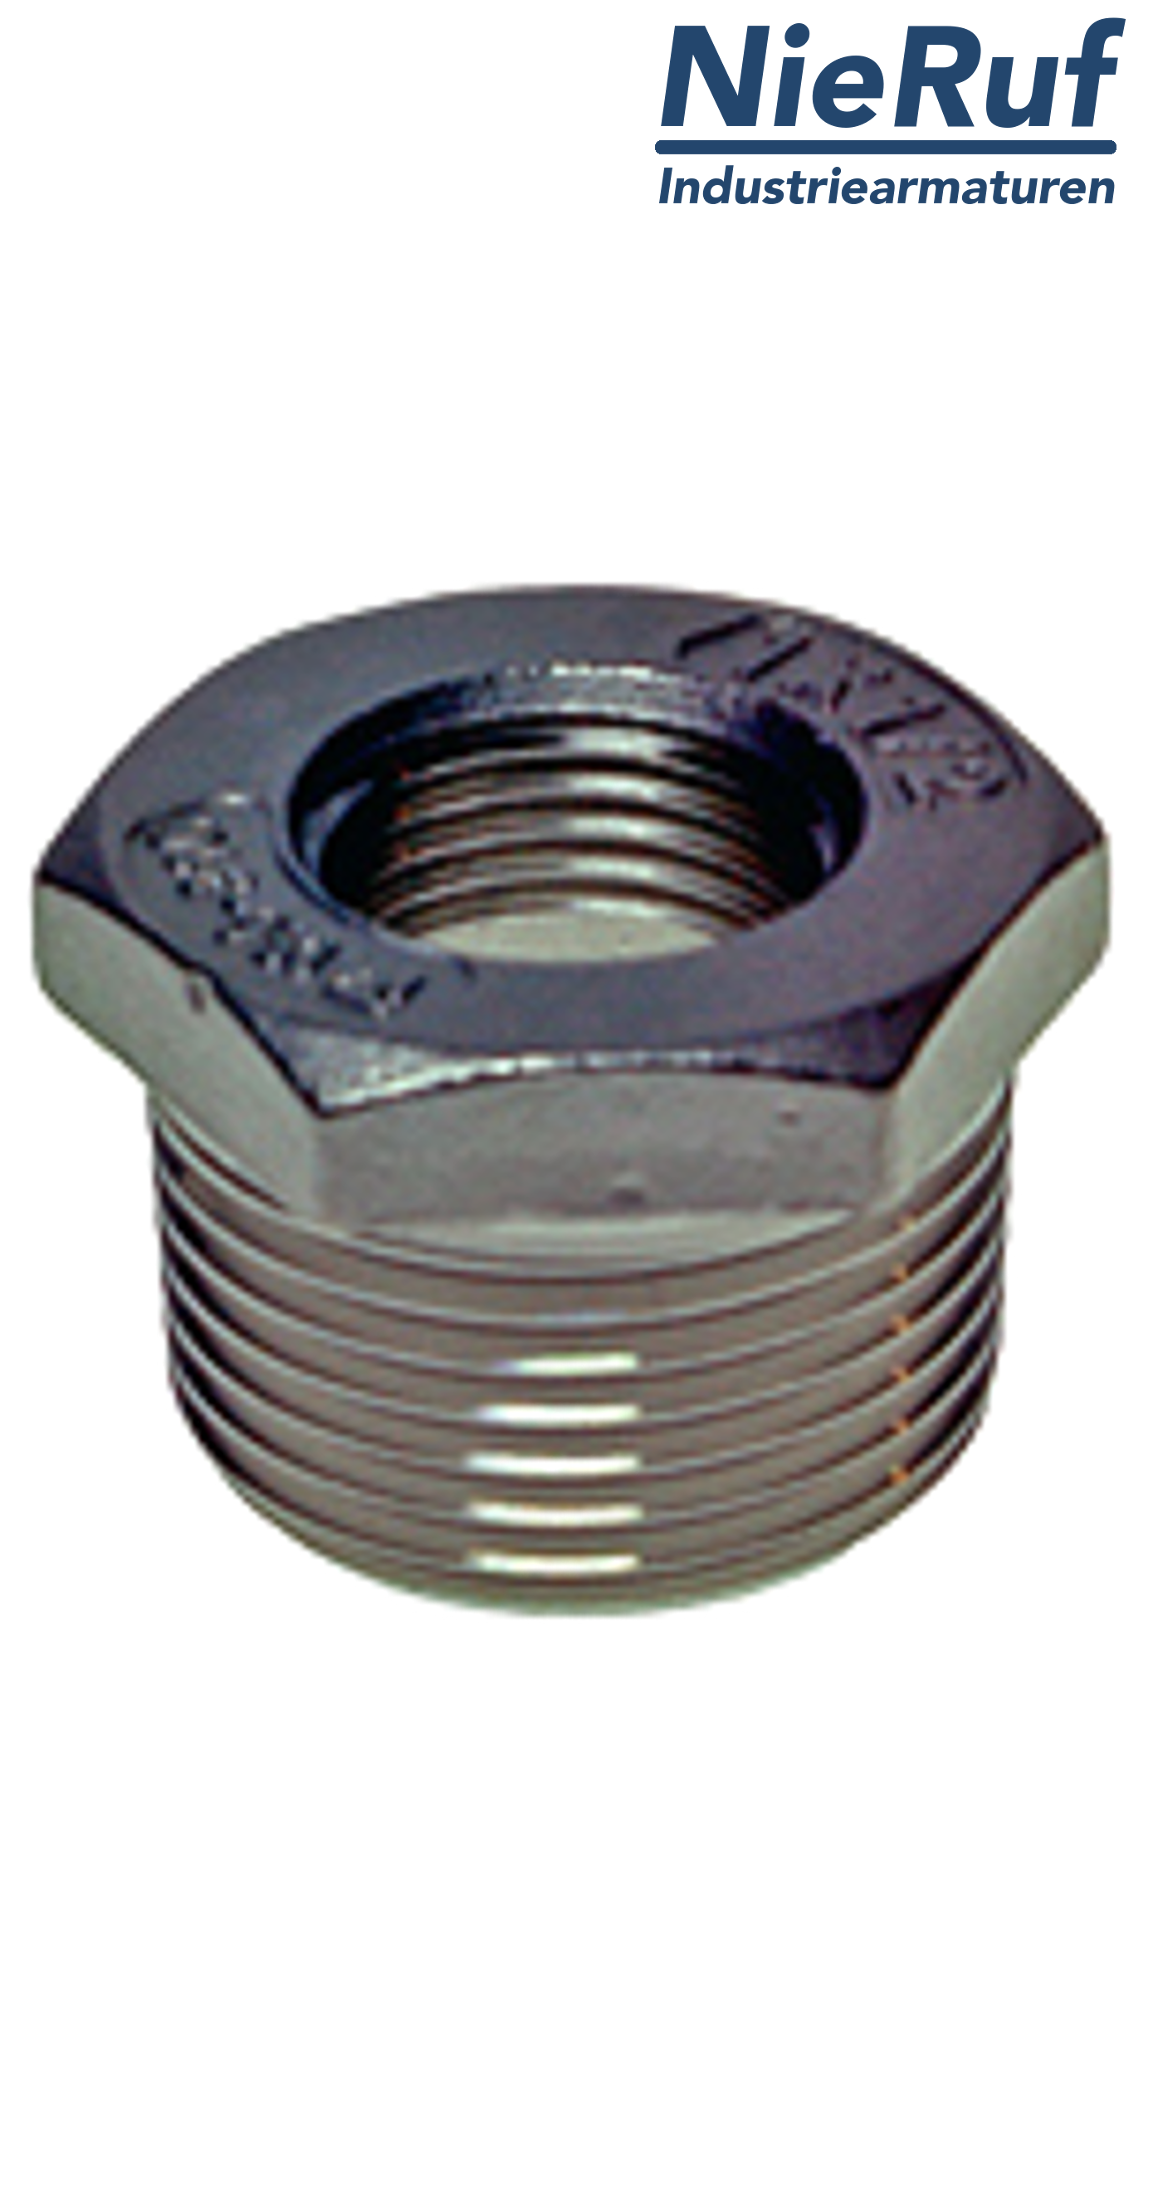 reducing bush 1/2" x 1/4" inch NPT male X female stainless steel 316L